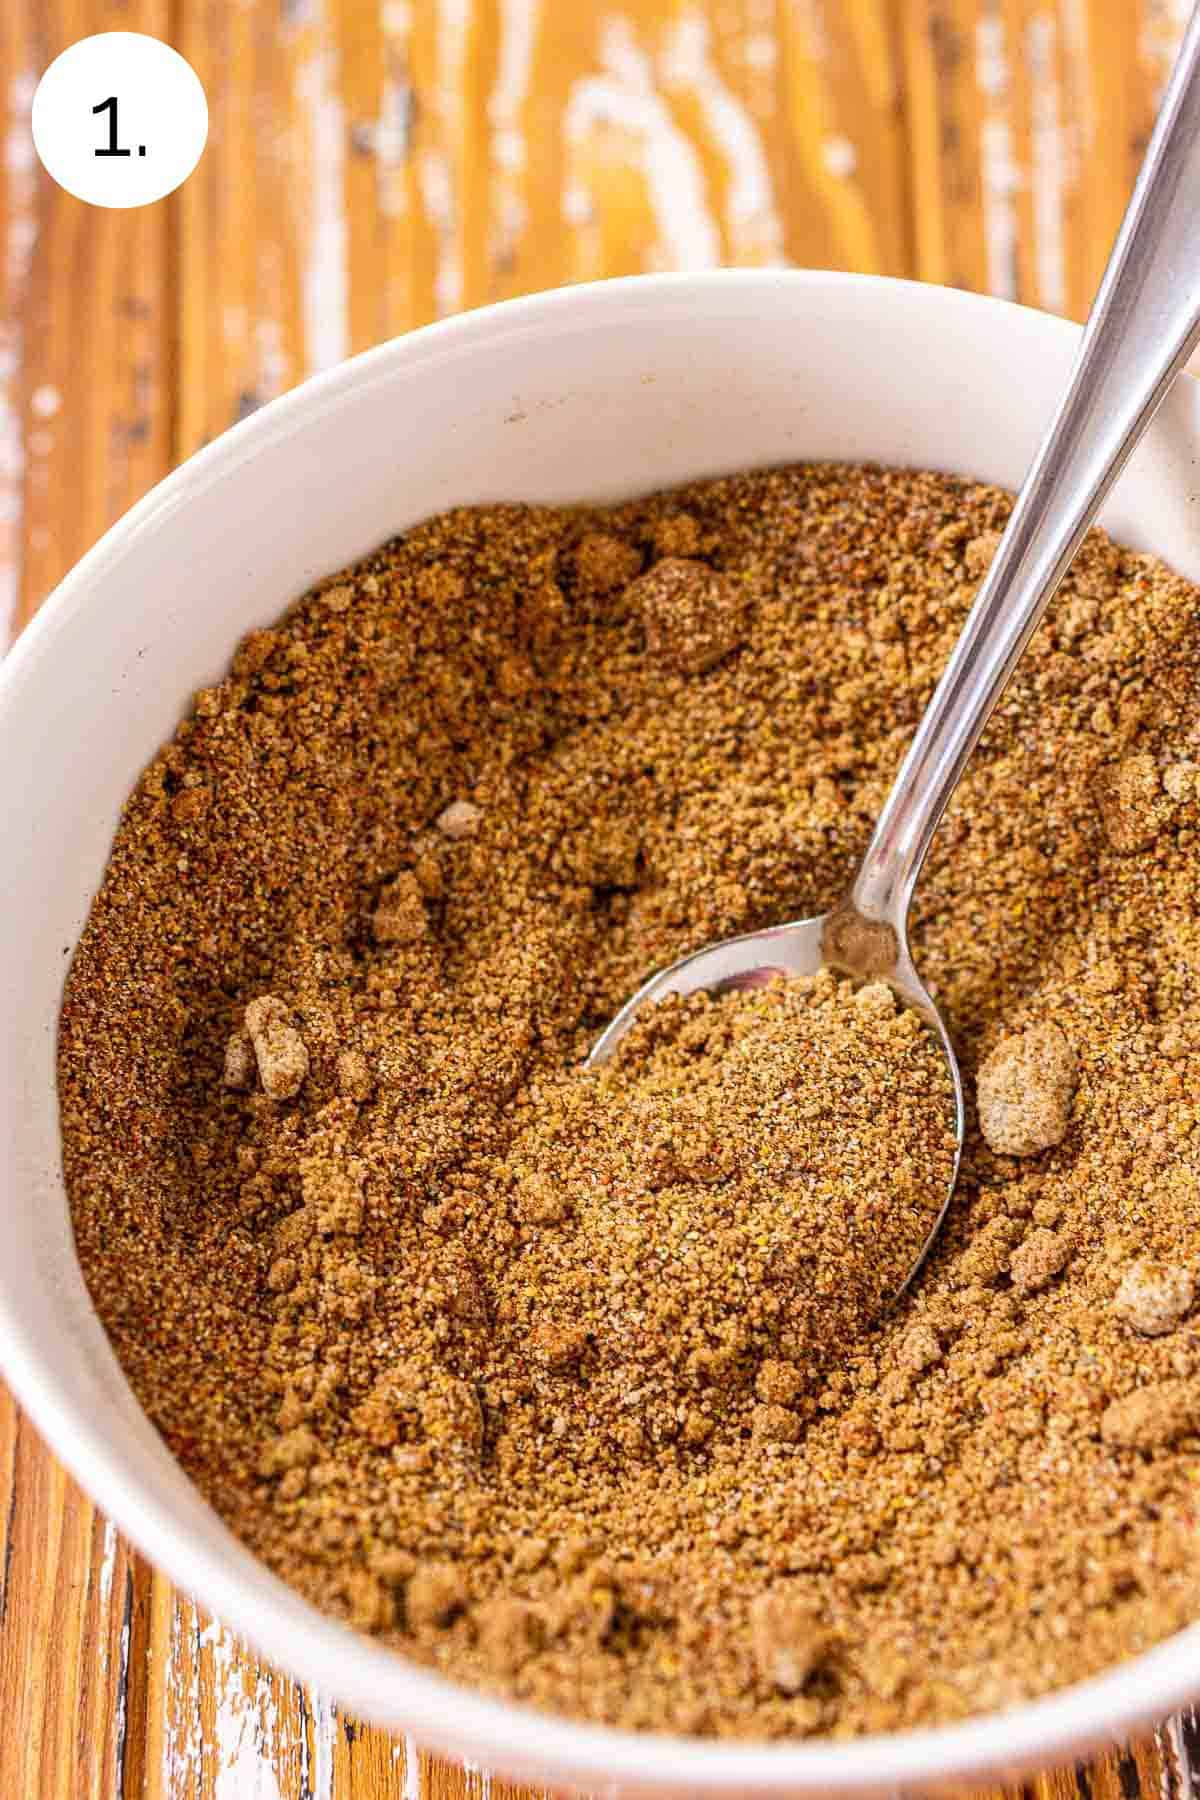 The spice mixture in a white small bowl on a wooden surface after stirring.